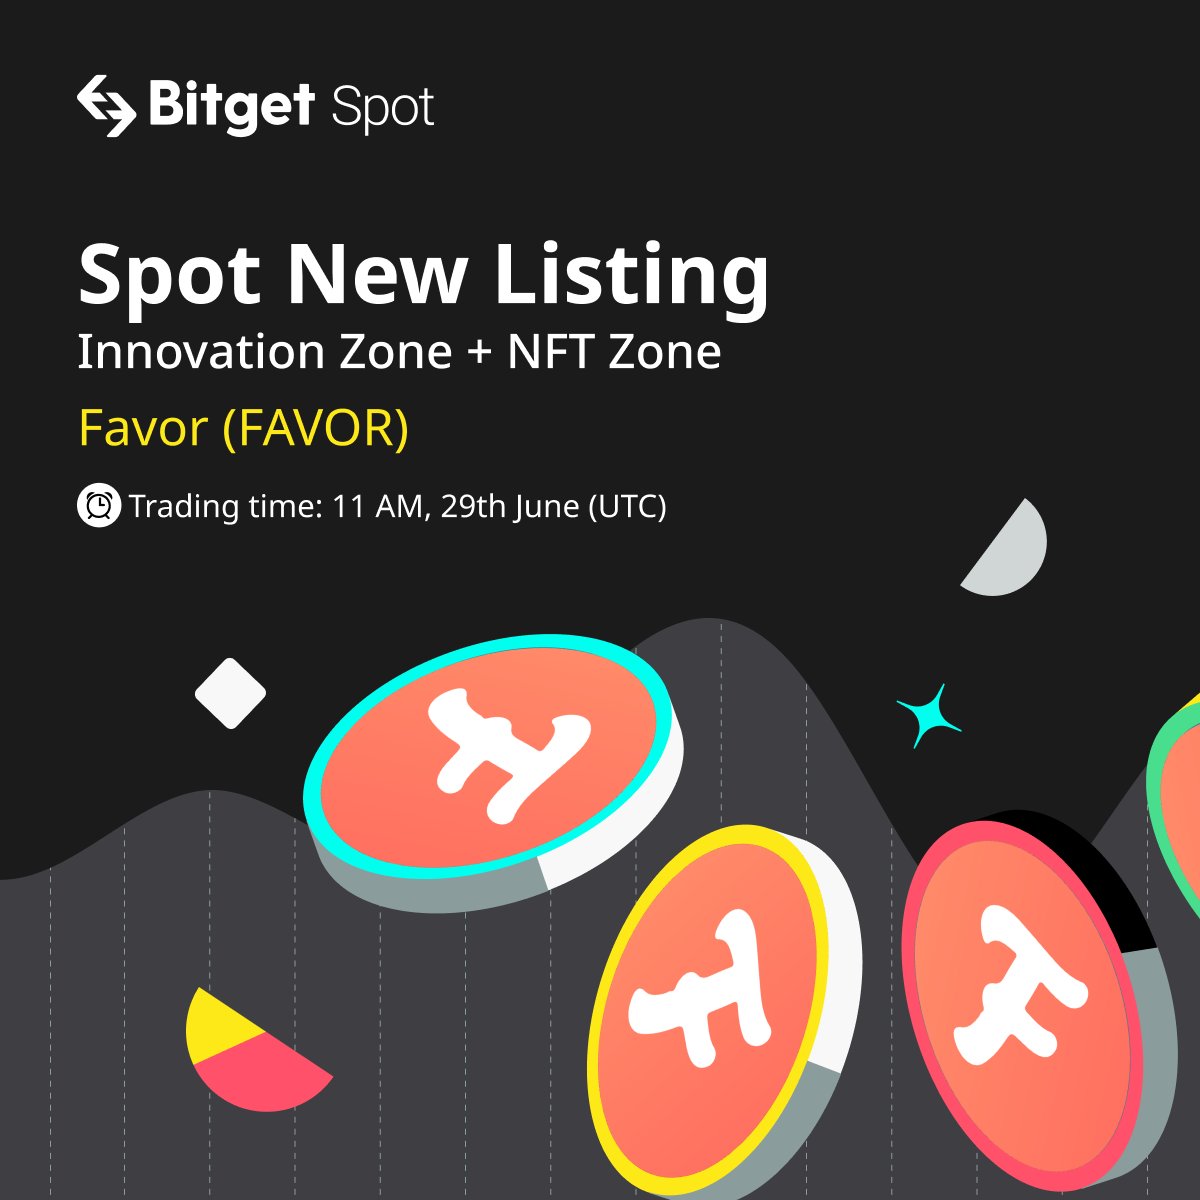 🆕 Spot New Listing #Bitget will list $FAVOR/USDT @favor_alliance on June 29, 11 AM UTC with up to 1,395,000 FAVOR to be won! ✅ Deposit now! 🎁 A total $100 #giveaway for 10 ppl! RT + TAG 3 friends Listing Info: bitget.com/en/support/art… Campaign Info: bitget.com/en/support/art…